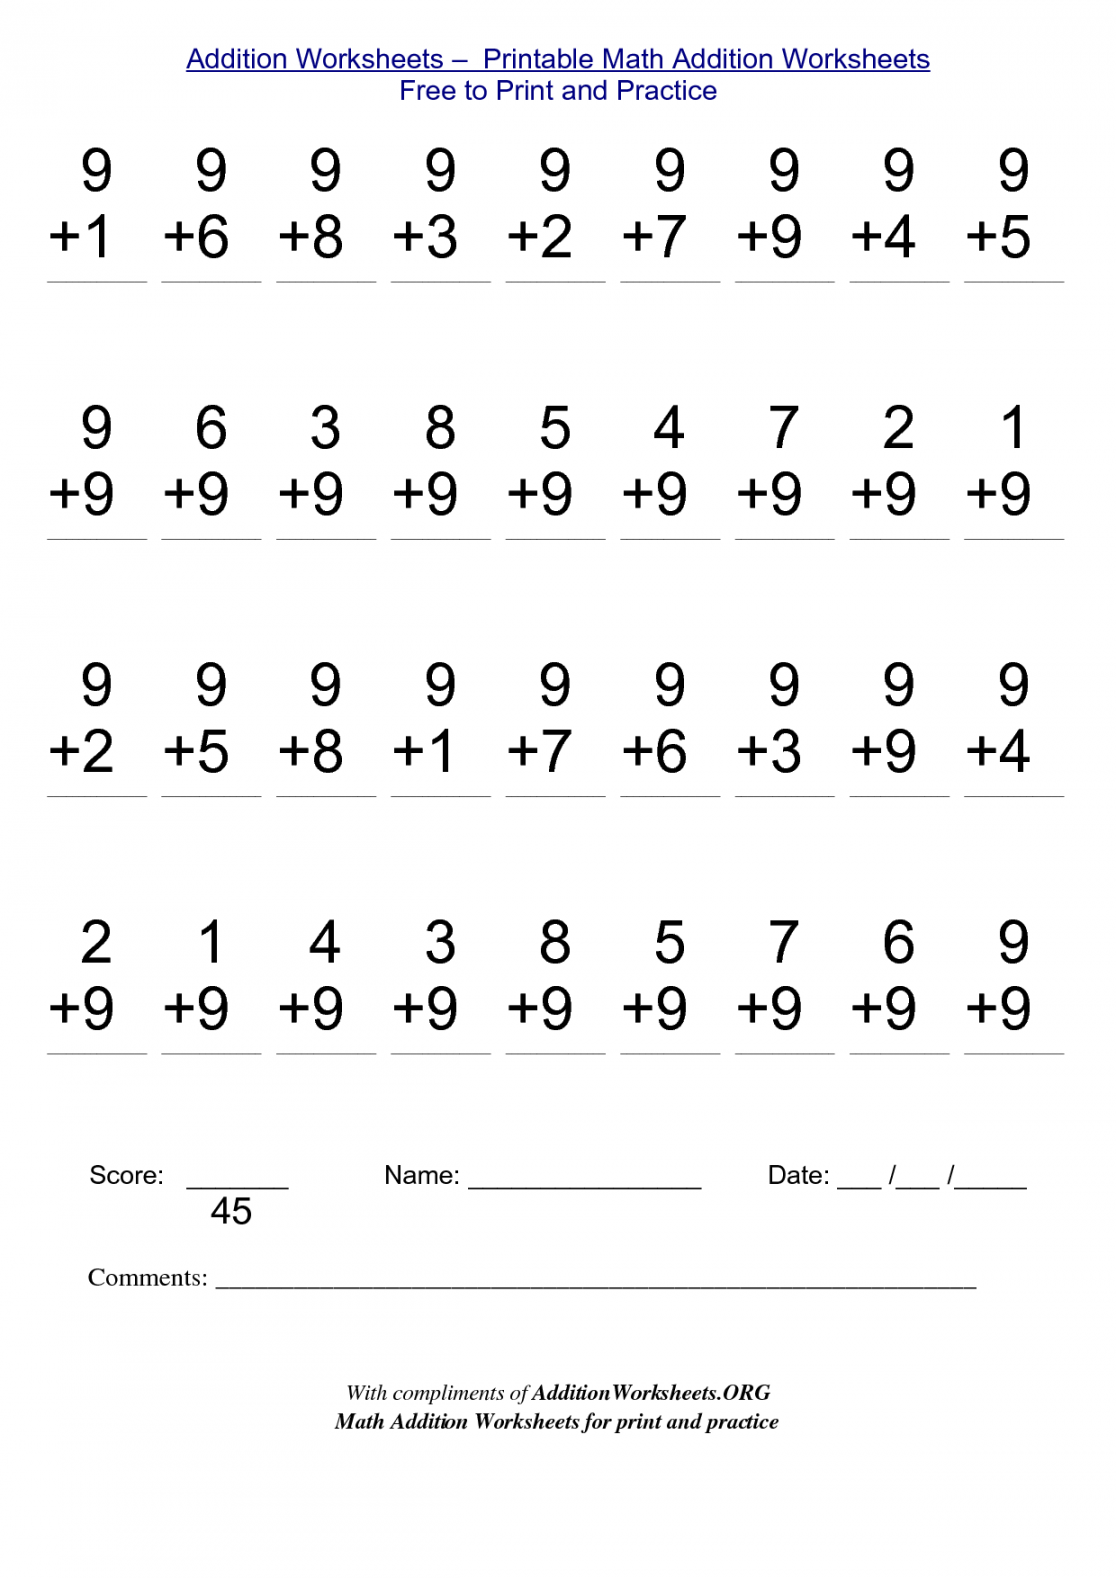 Math Worksheets for Free to Print  Math addition worksheets